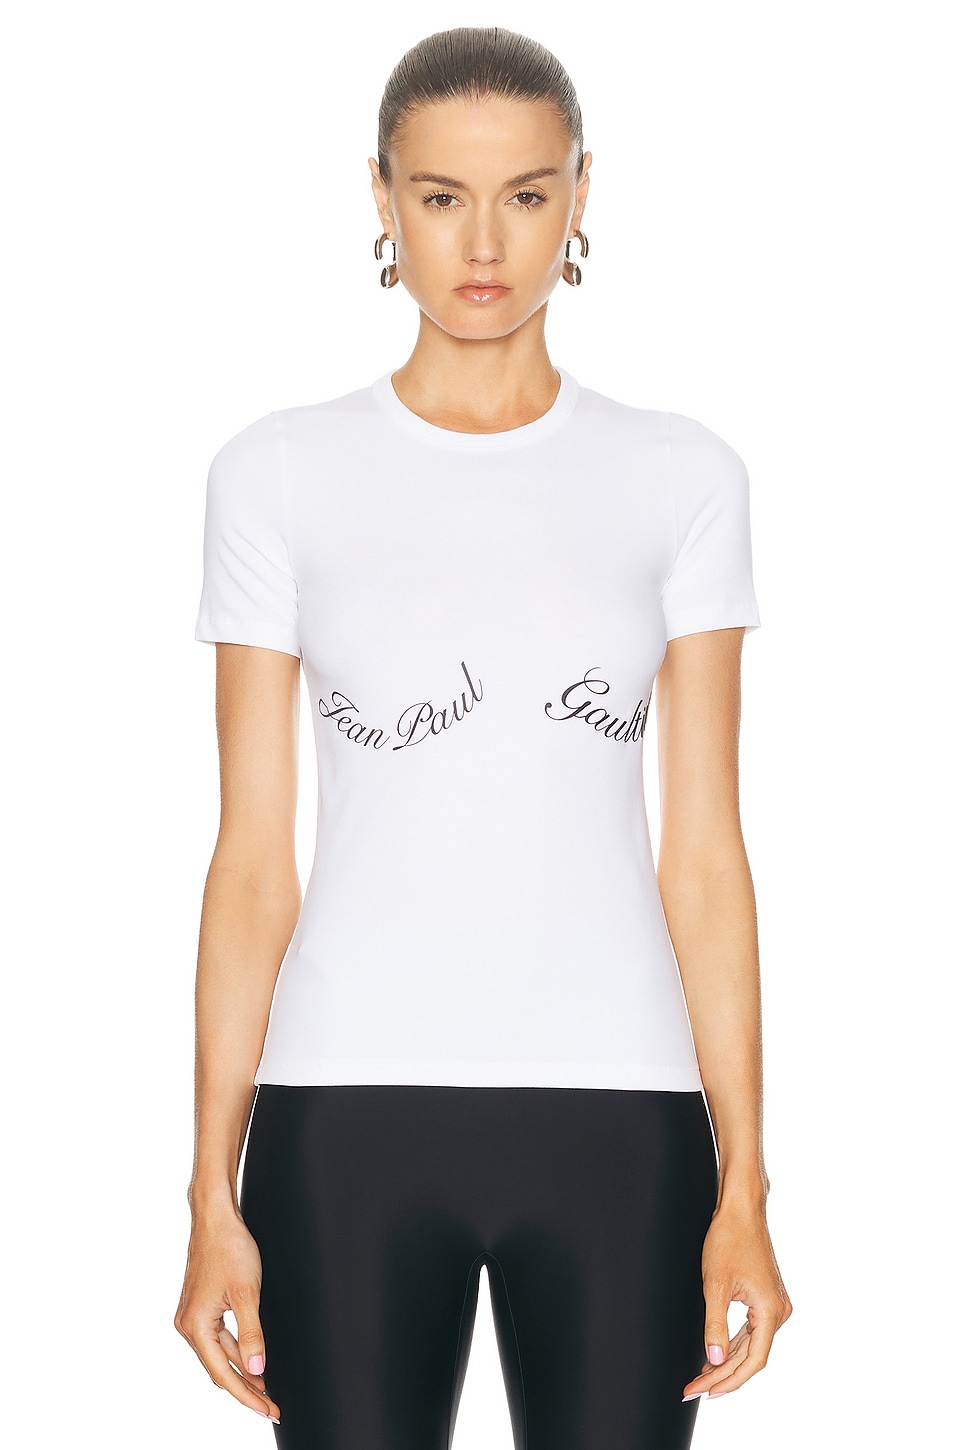 Image 1 of Jean Paul Gaultier Cotton Baby Tee Shirt in White & Black